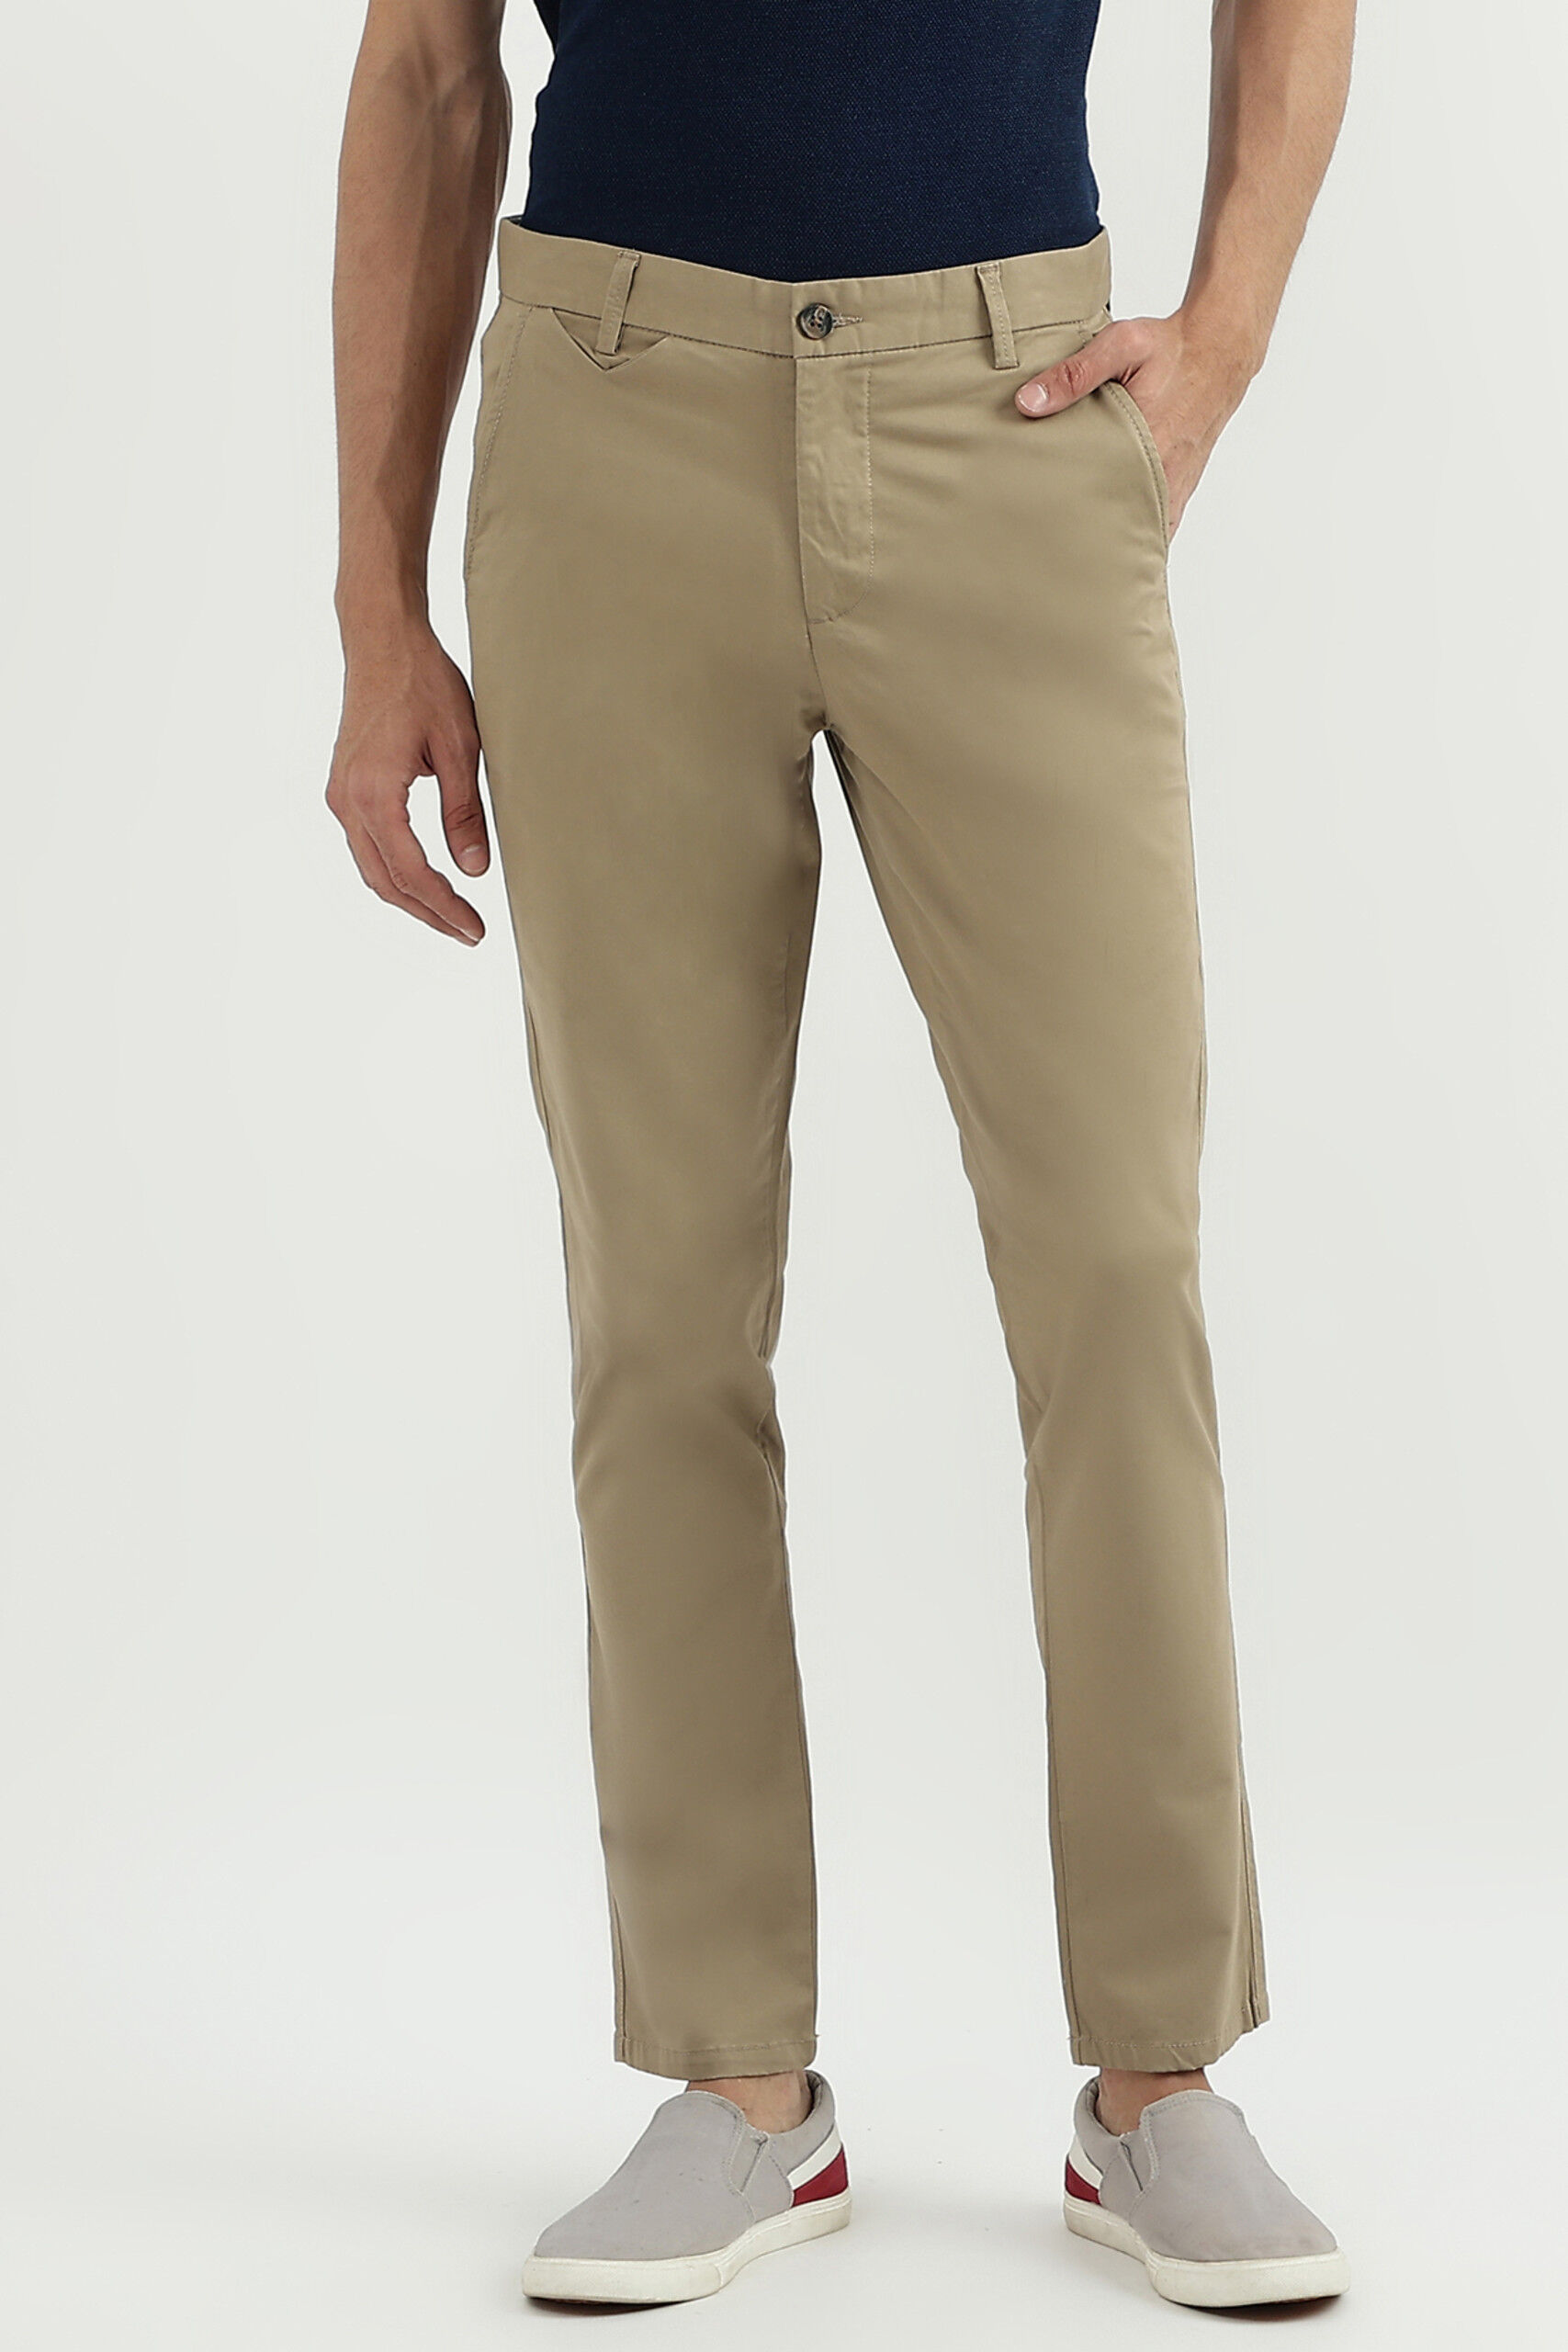 Men's Trousers New Collection 2021 | Benetton